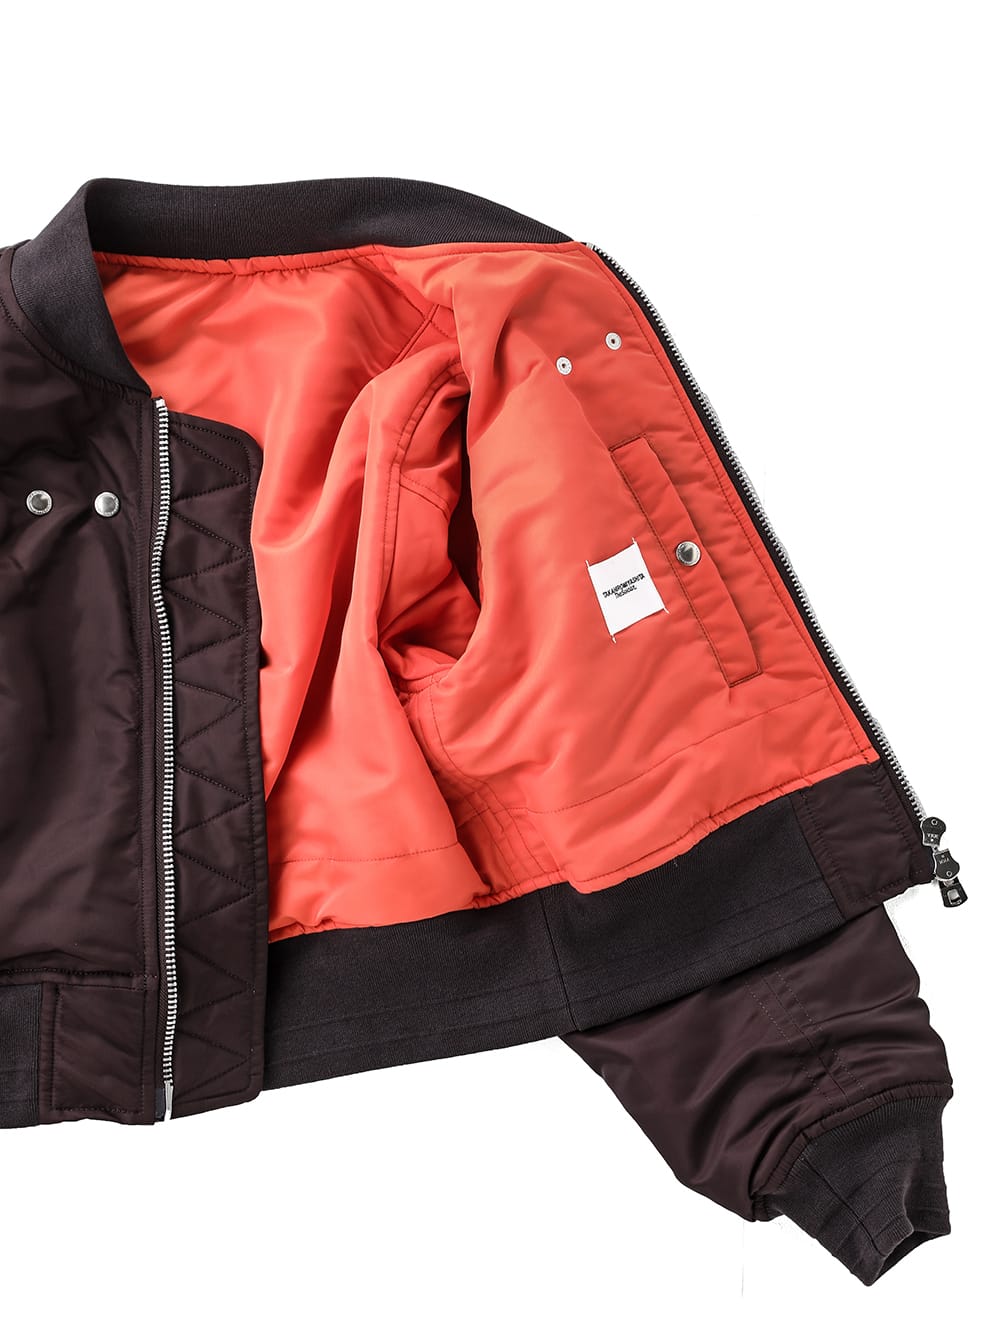 sj.0018bAW23-maroon two-way cropped bomber jacket. THE TWO OF US 